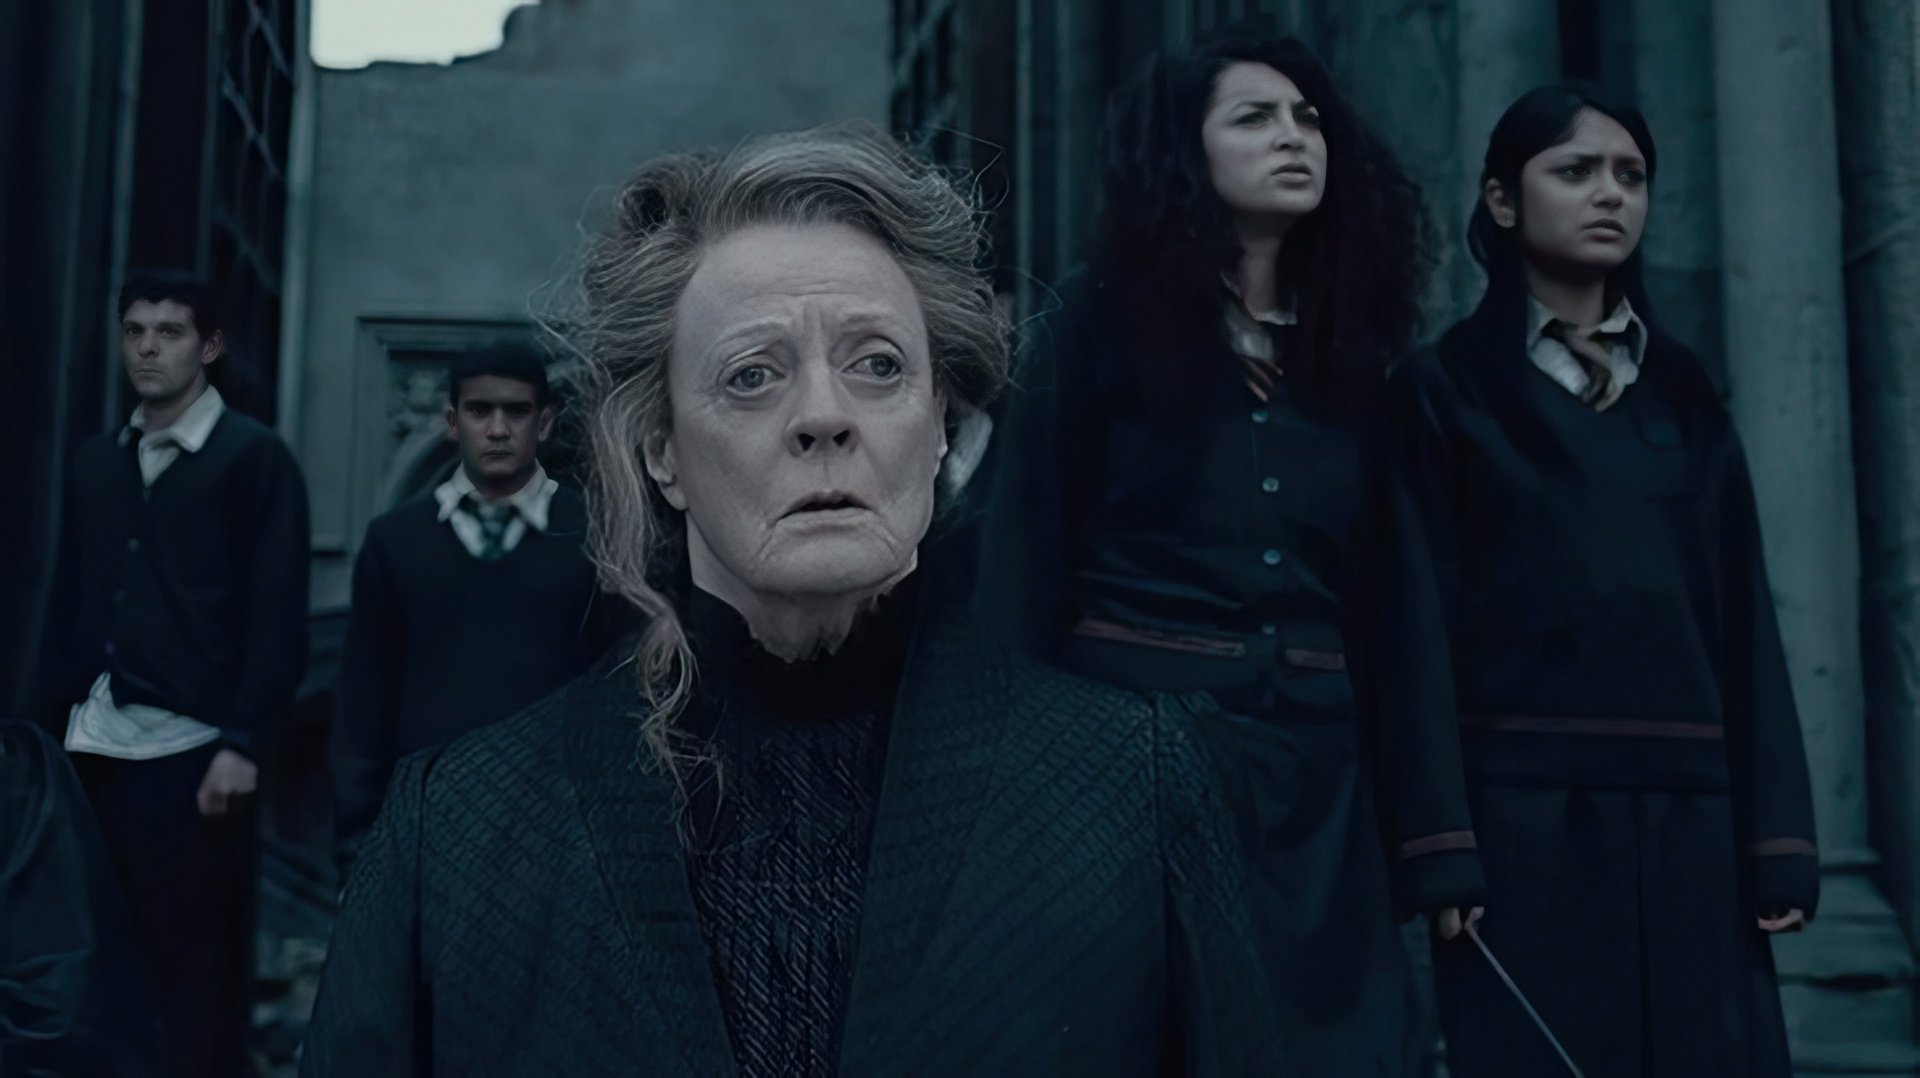 Maggie Smith and Anna Shaffer in the movie Harry Potter and the Deathly Hallows: Part II